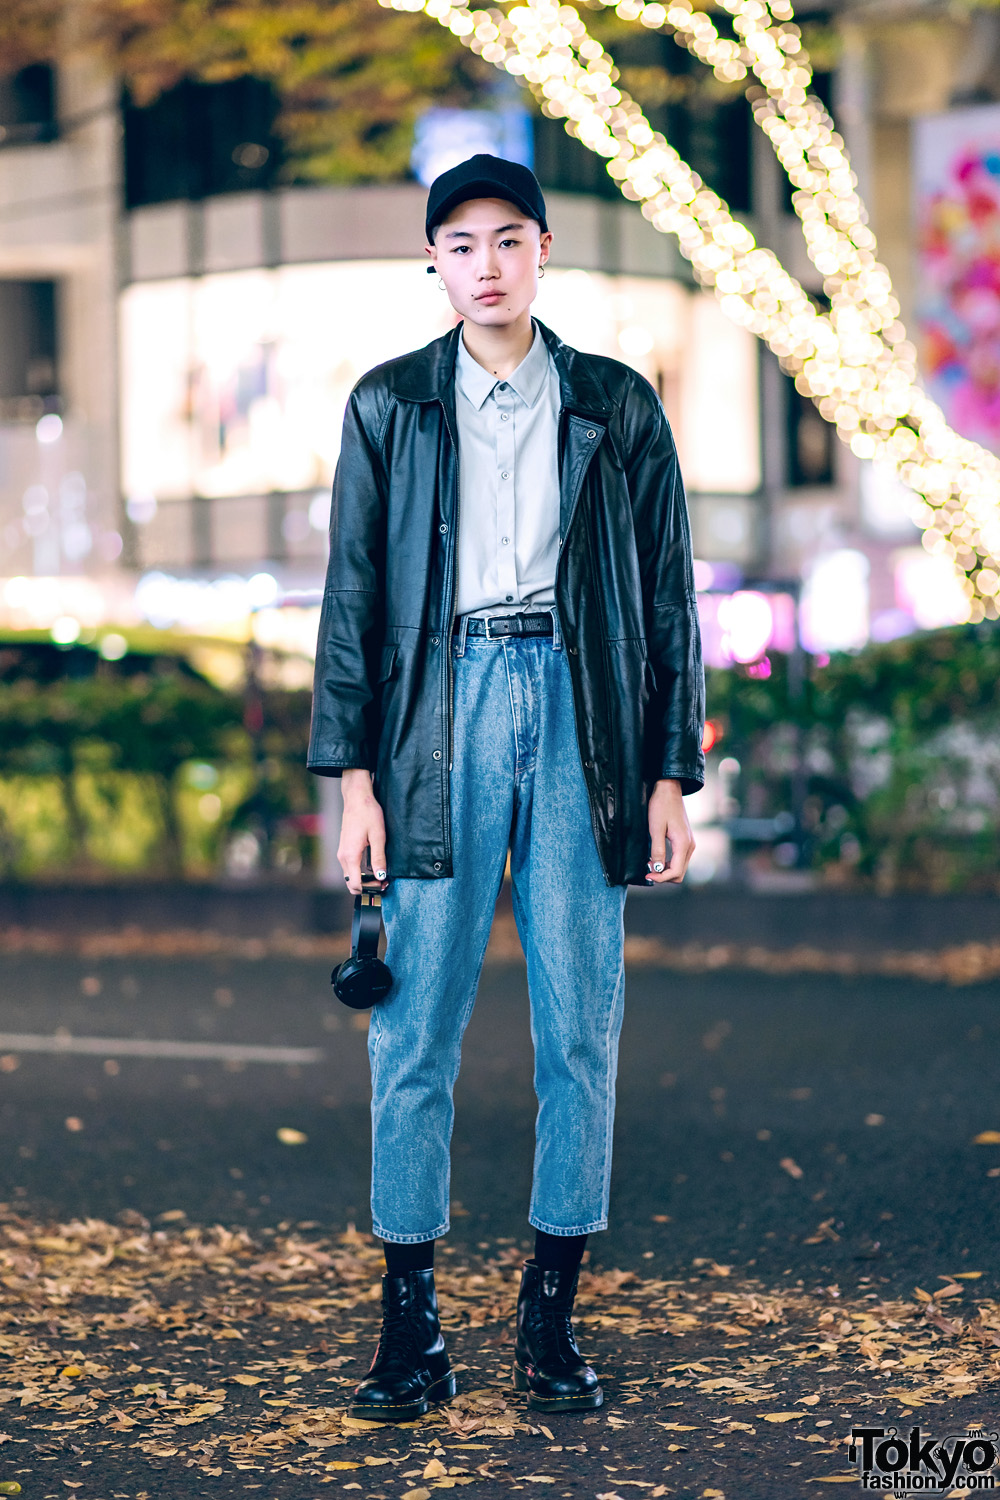 Japanese Male Model Street Style w/ Vintage Black Leather Jacket, Cropped Jeans & Dr. Martens Boots